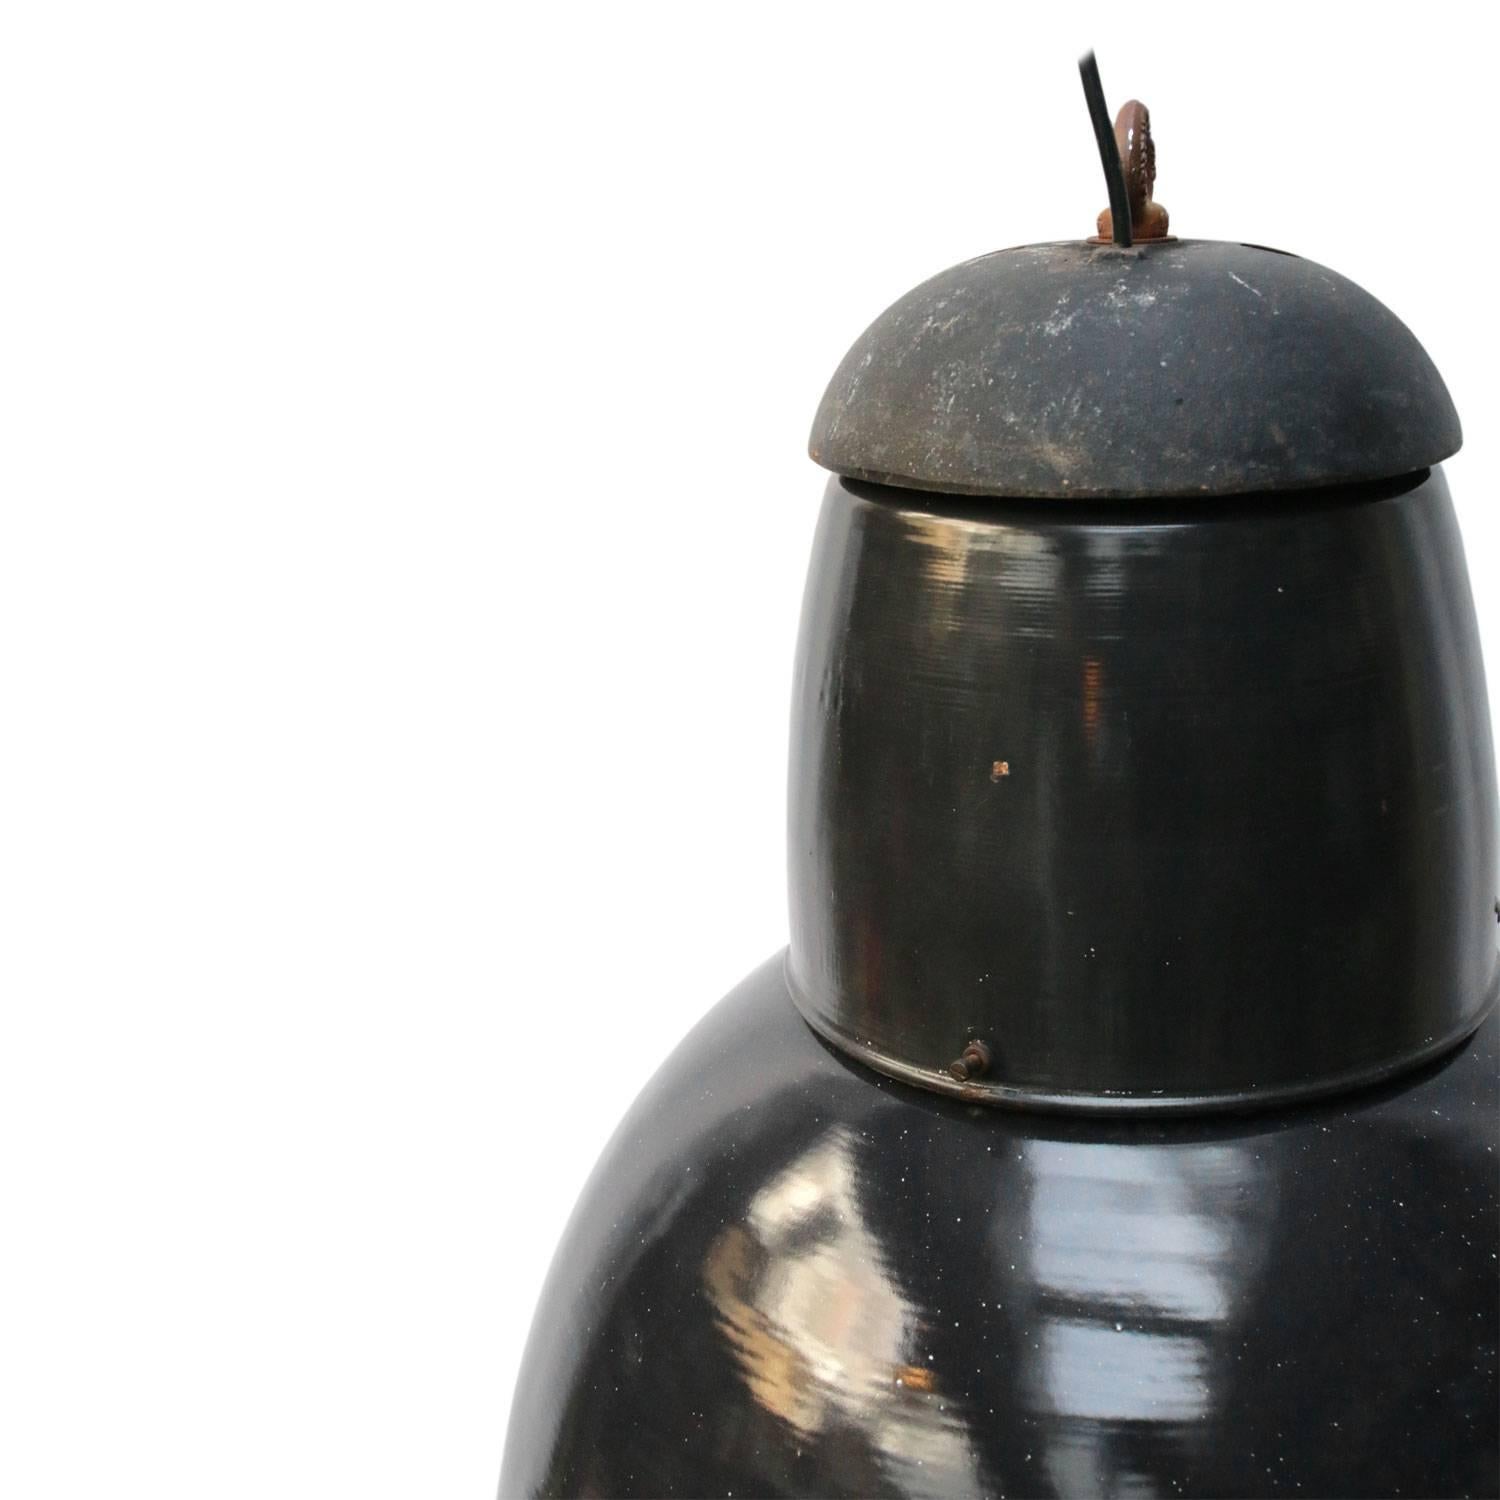 Black / very dark blue enamel Industrial pendant.
Nicely aged coloring in patina. White interior.

Measures: Weight: 7.5 kg / 16.5 lb.

All lamps have been made suitable by international standards for incandescent light bulbs, energy-efficient